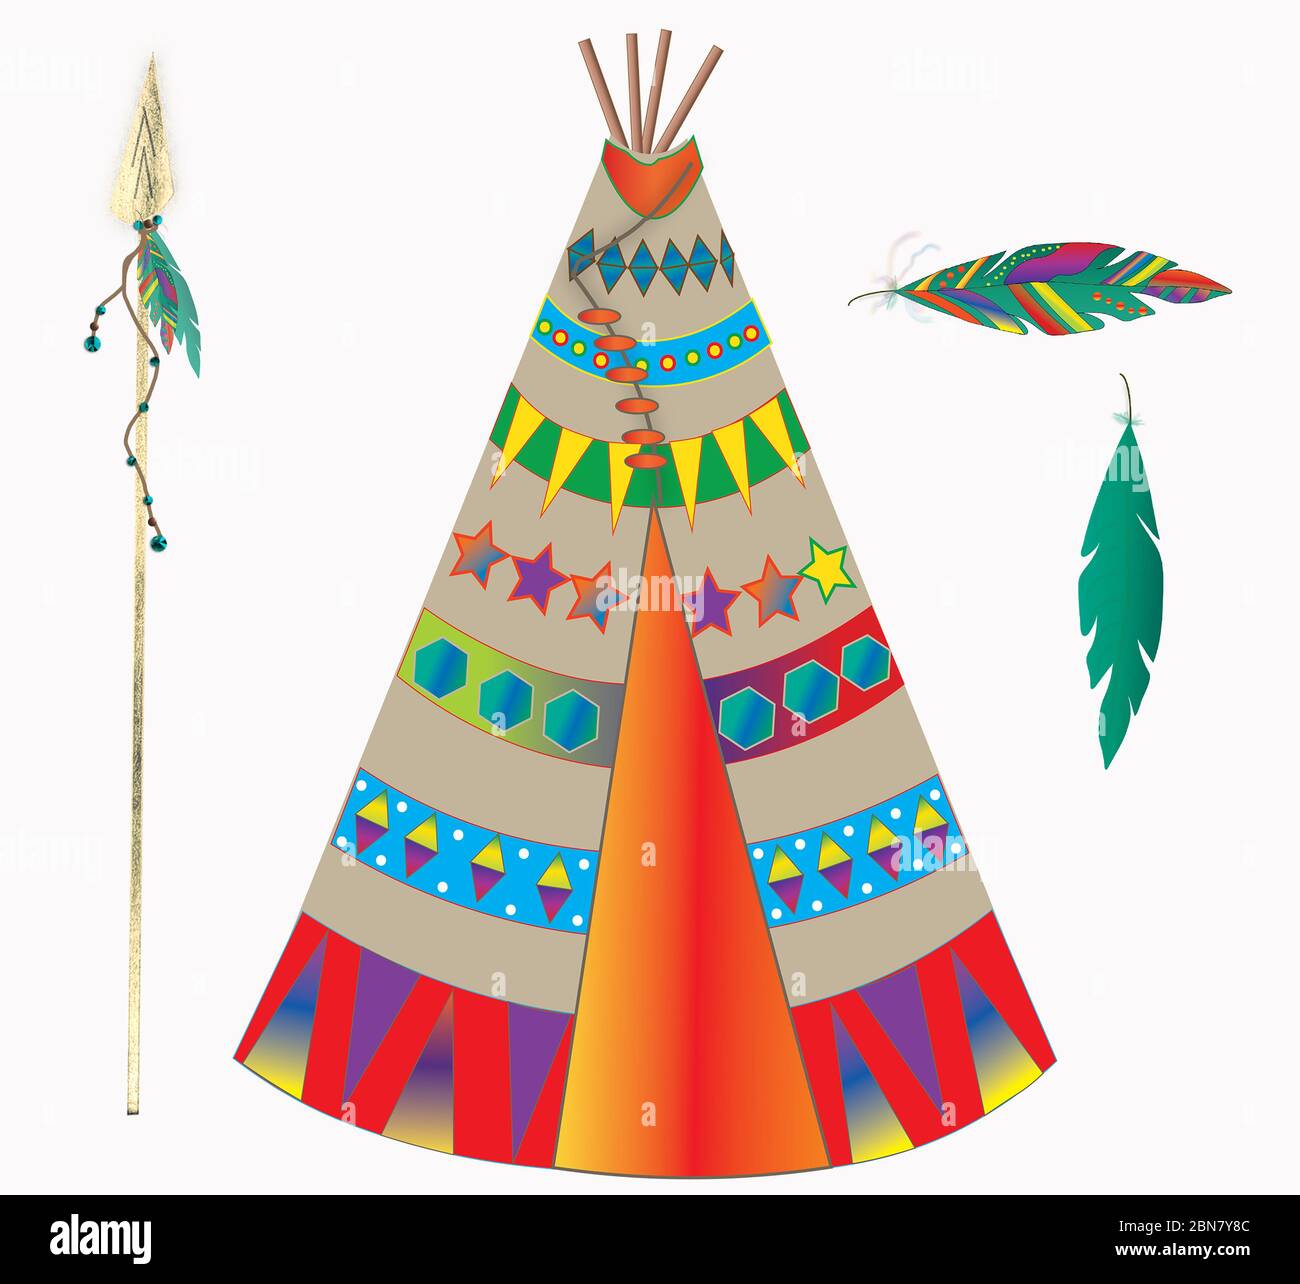 Graphic Illustration of images pertaining to the lifestyle of the American native Indian including, tepee, arrow and feathers isolated o white backgro Stock Photo